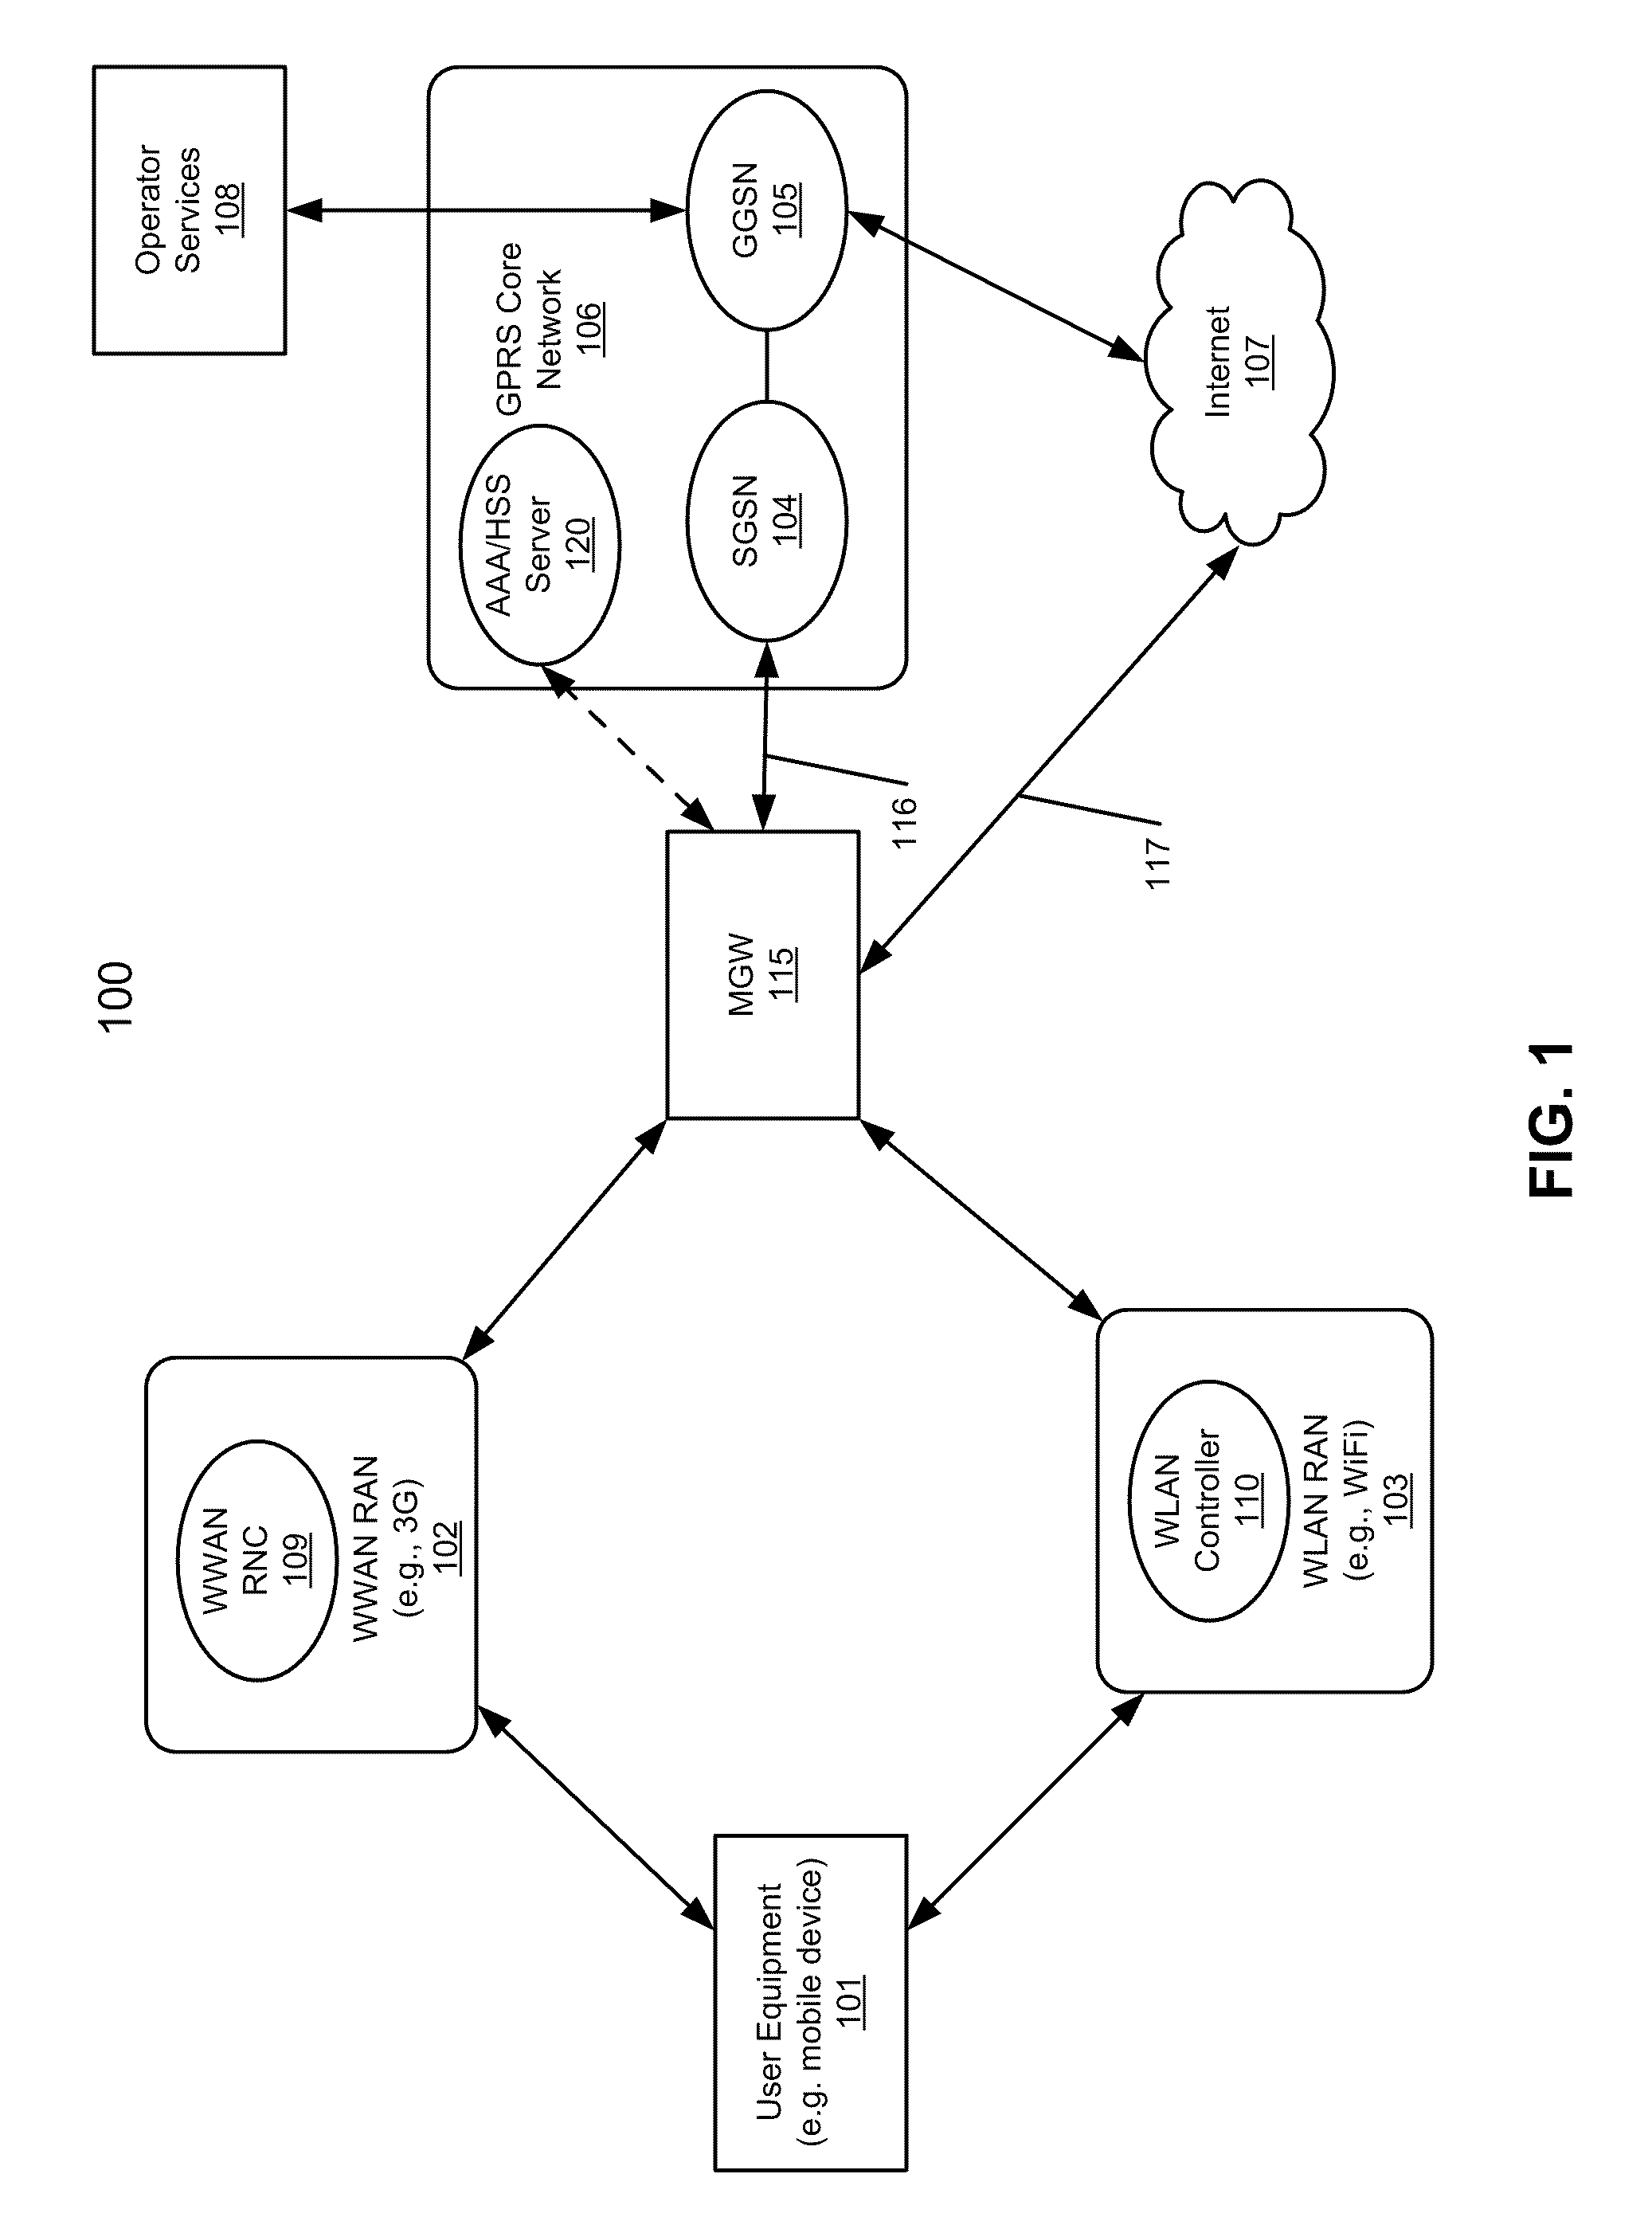 Method and system for interworking a WLAN into a WWAN for session and mobility management